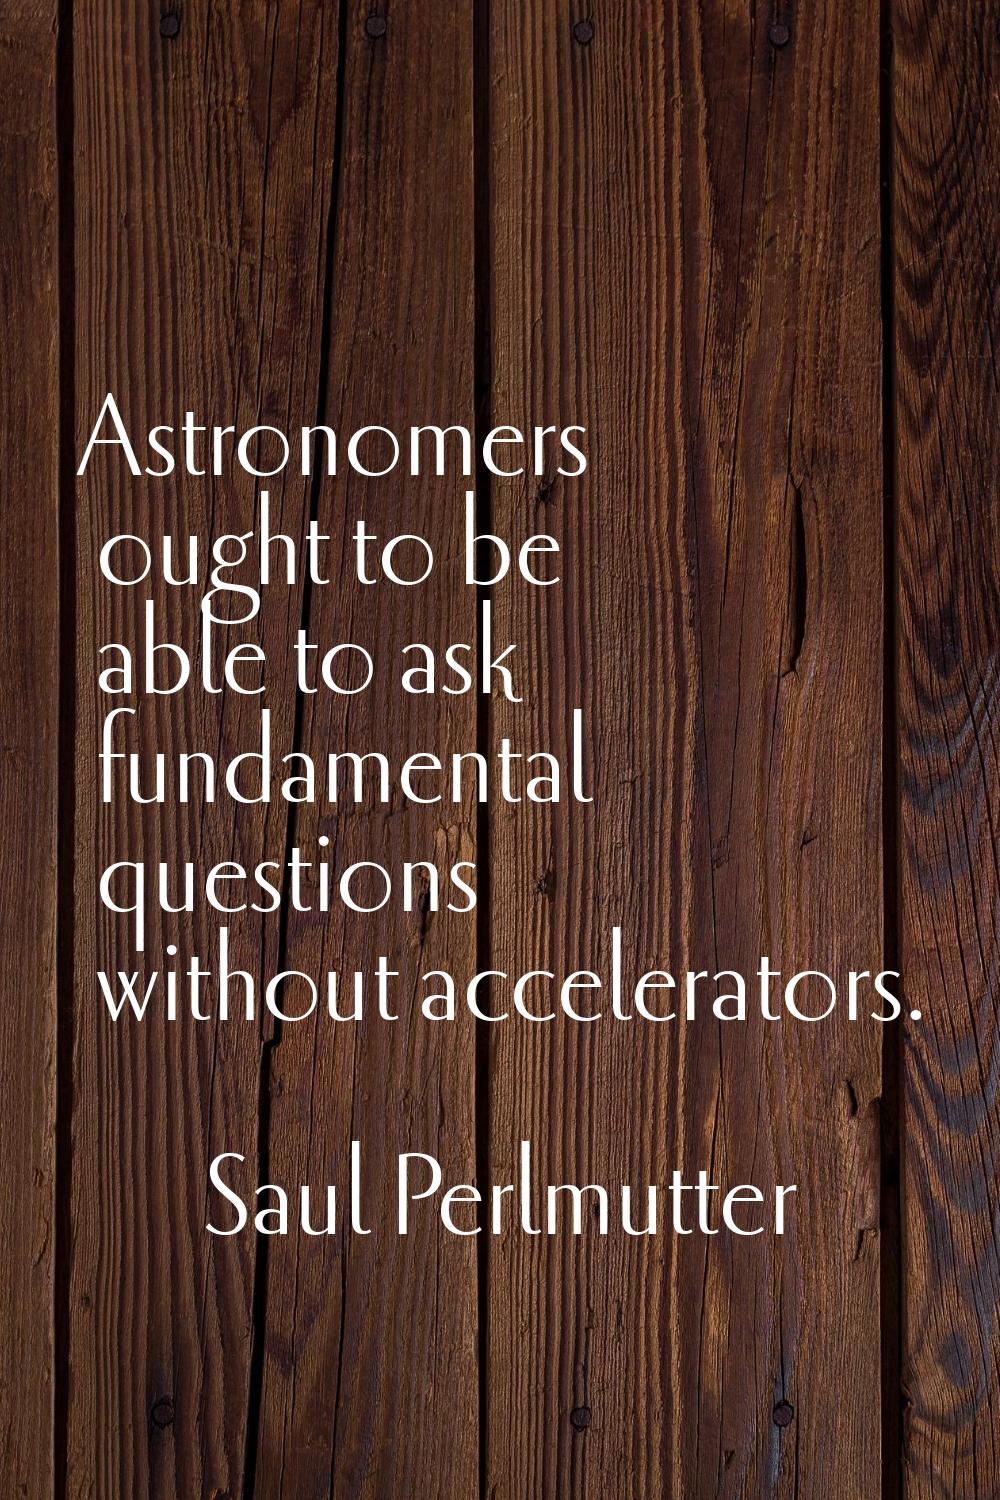 Astronomers ought to be able to ask fundamental questions without accelerators.